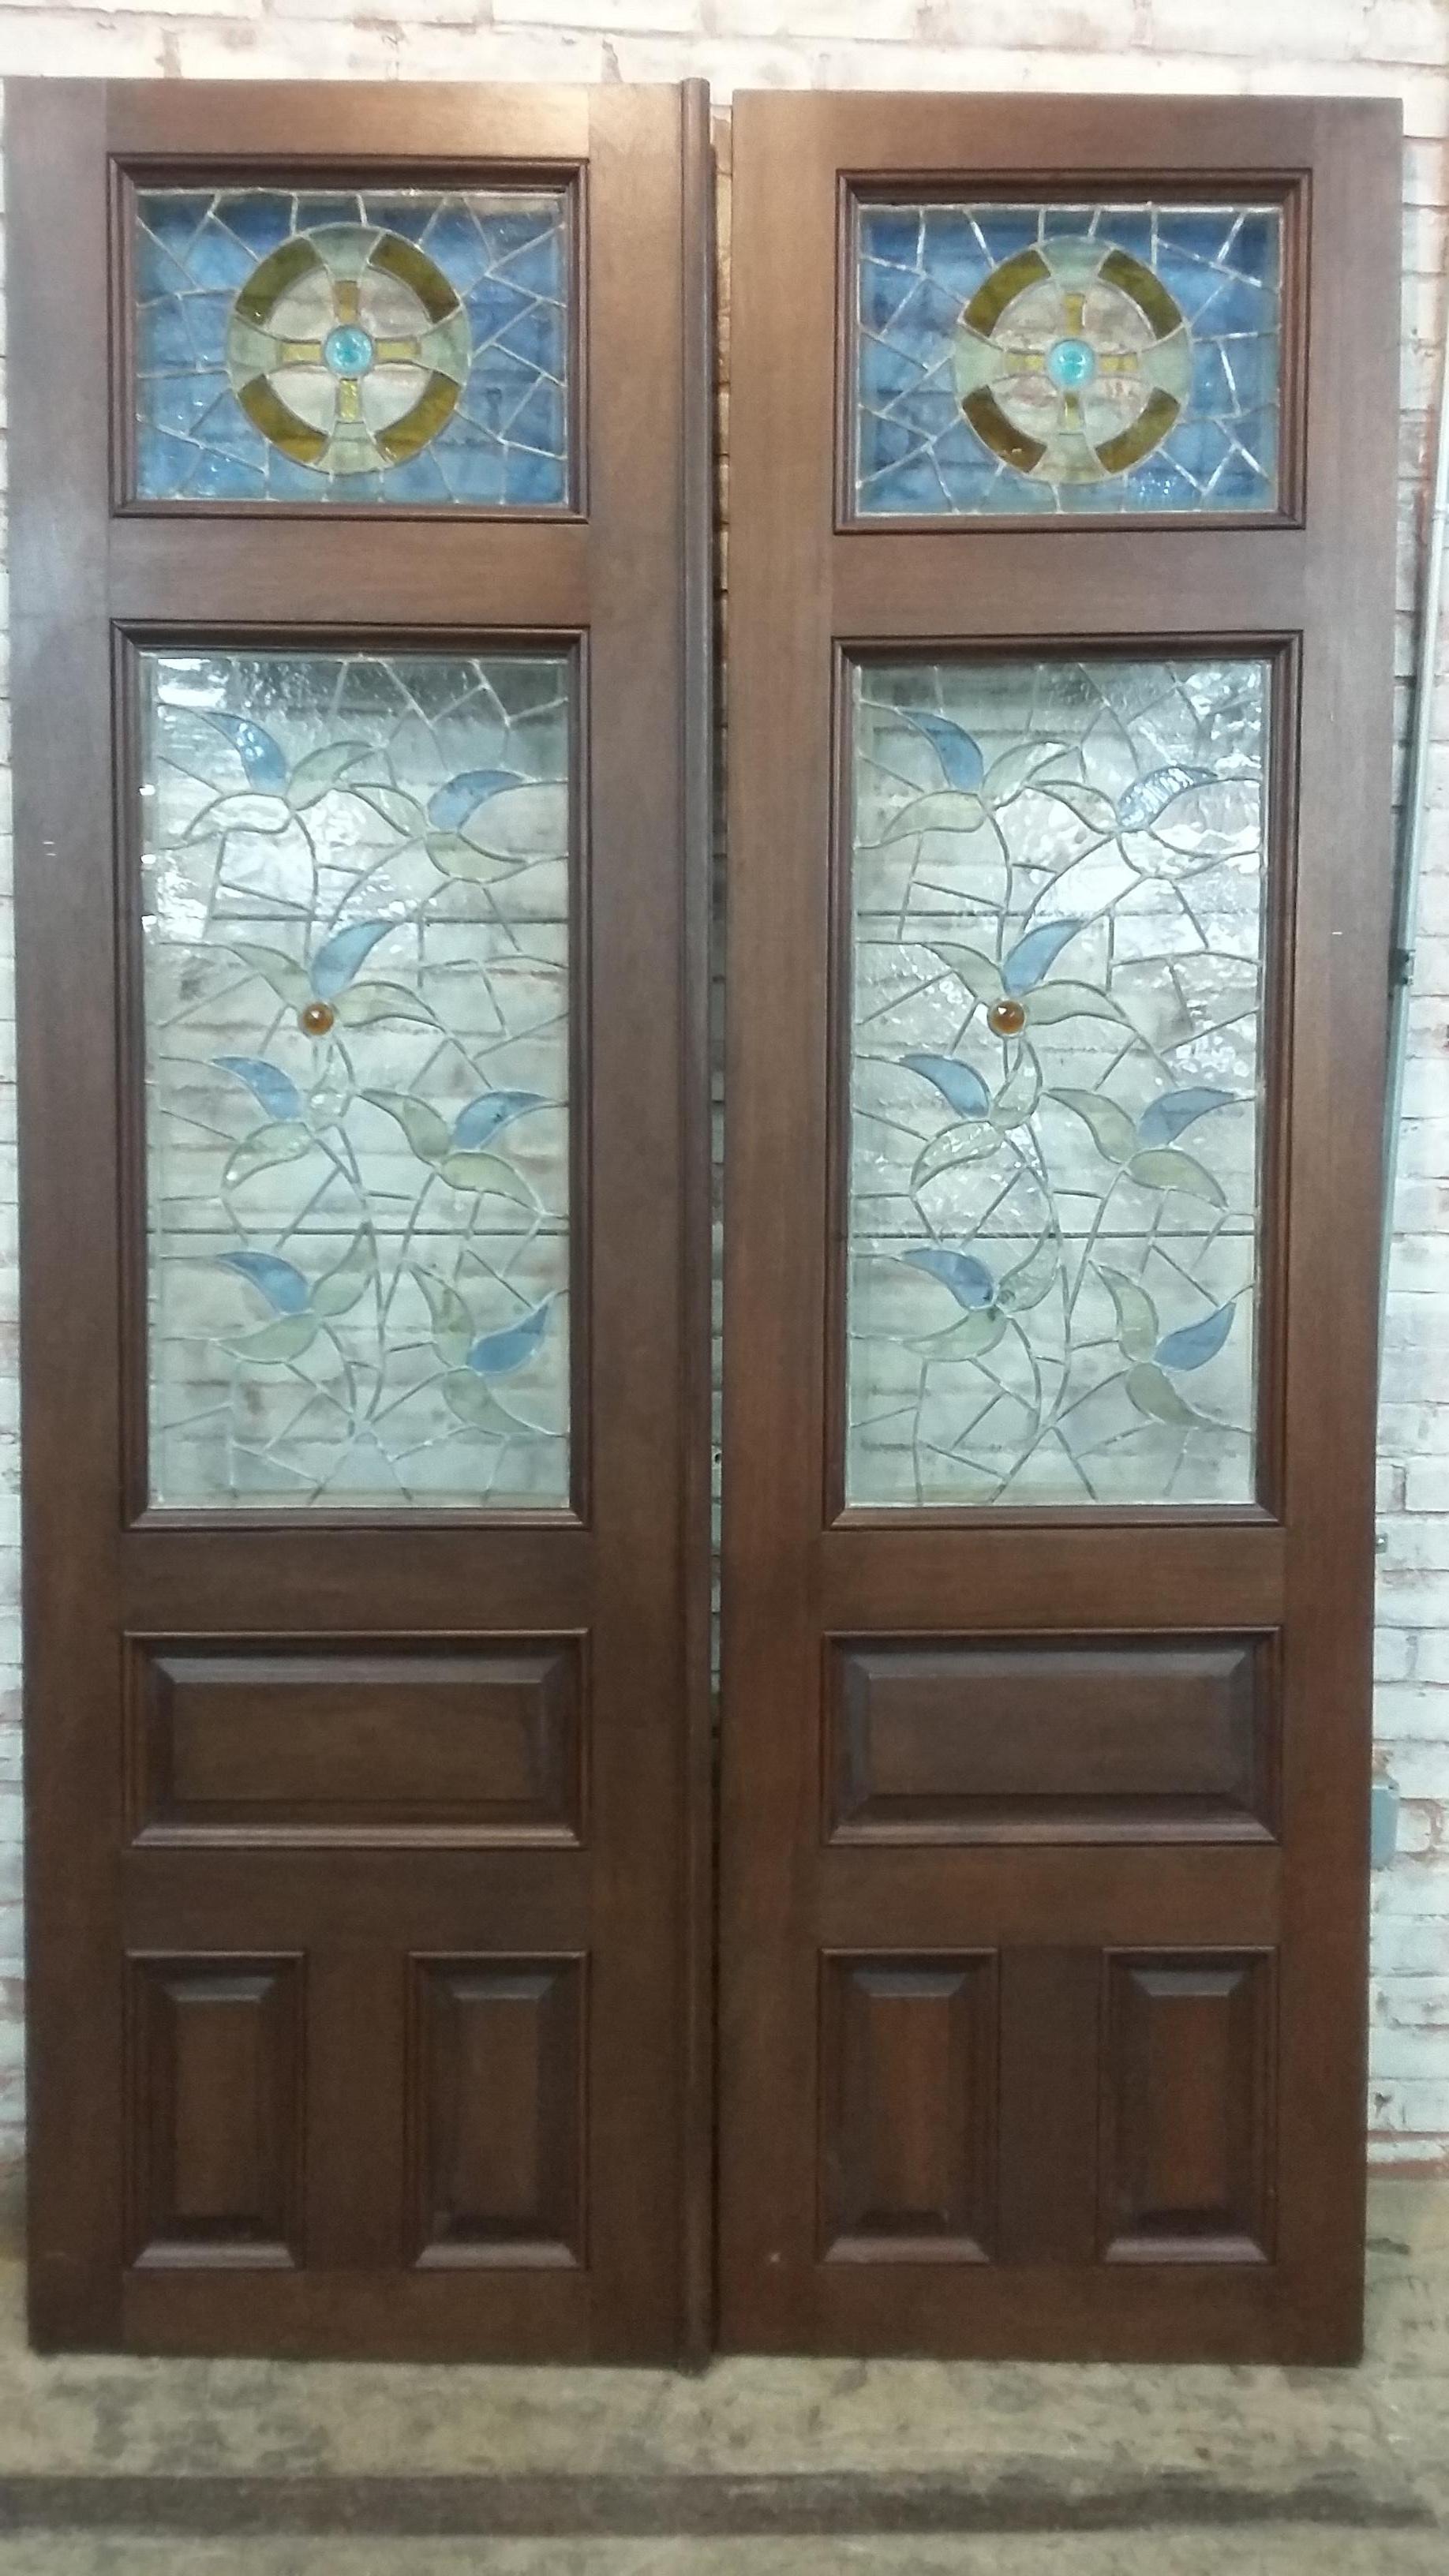 20th Century Pair of Mahogany Doors with Antique 19th Century Stained-Glass Panels